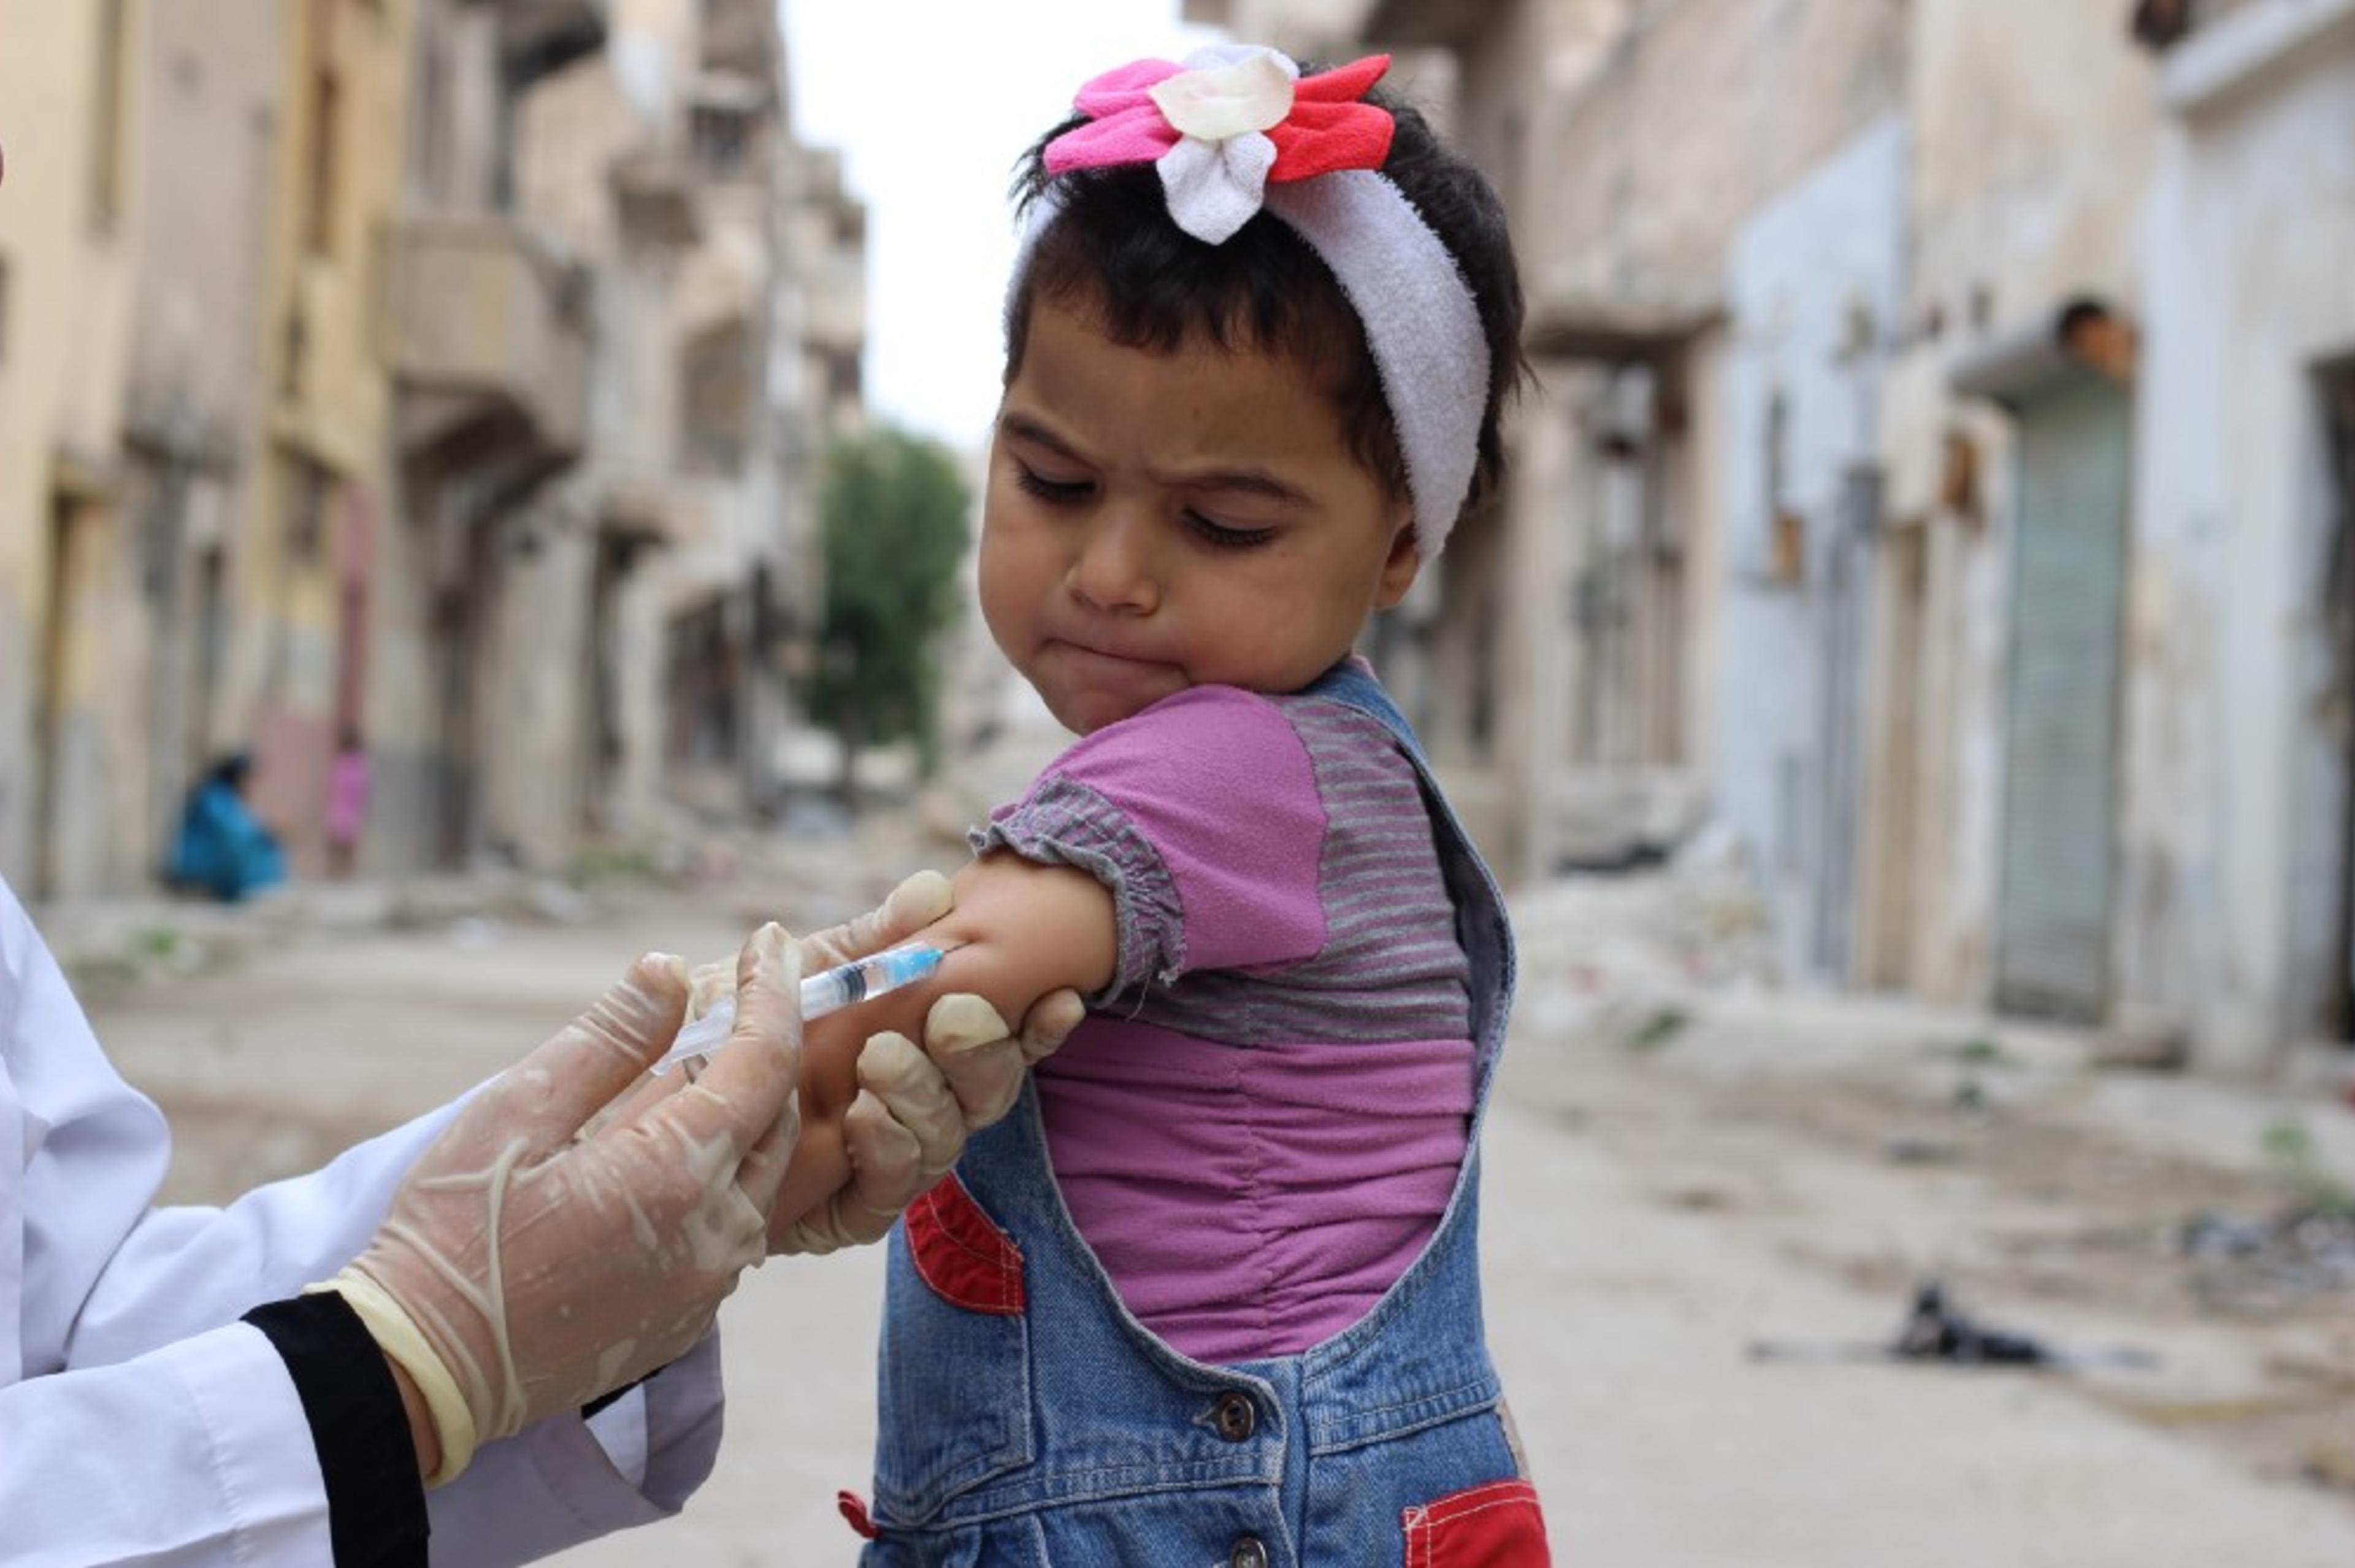 Children from poorer countries are more likely to miss out on lifesaving vaccinations